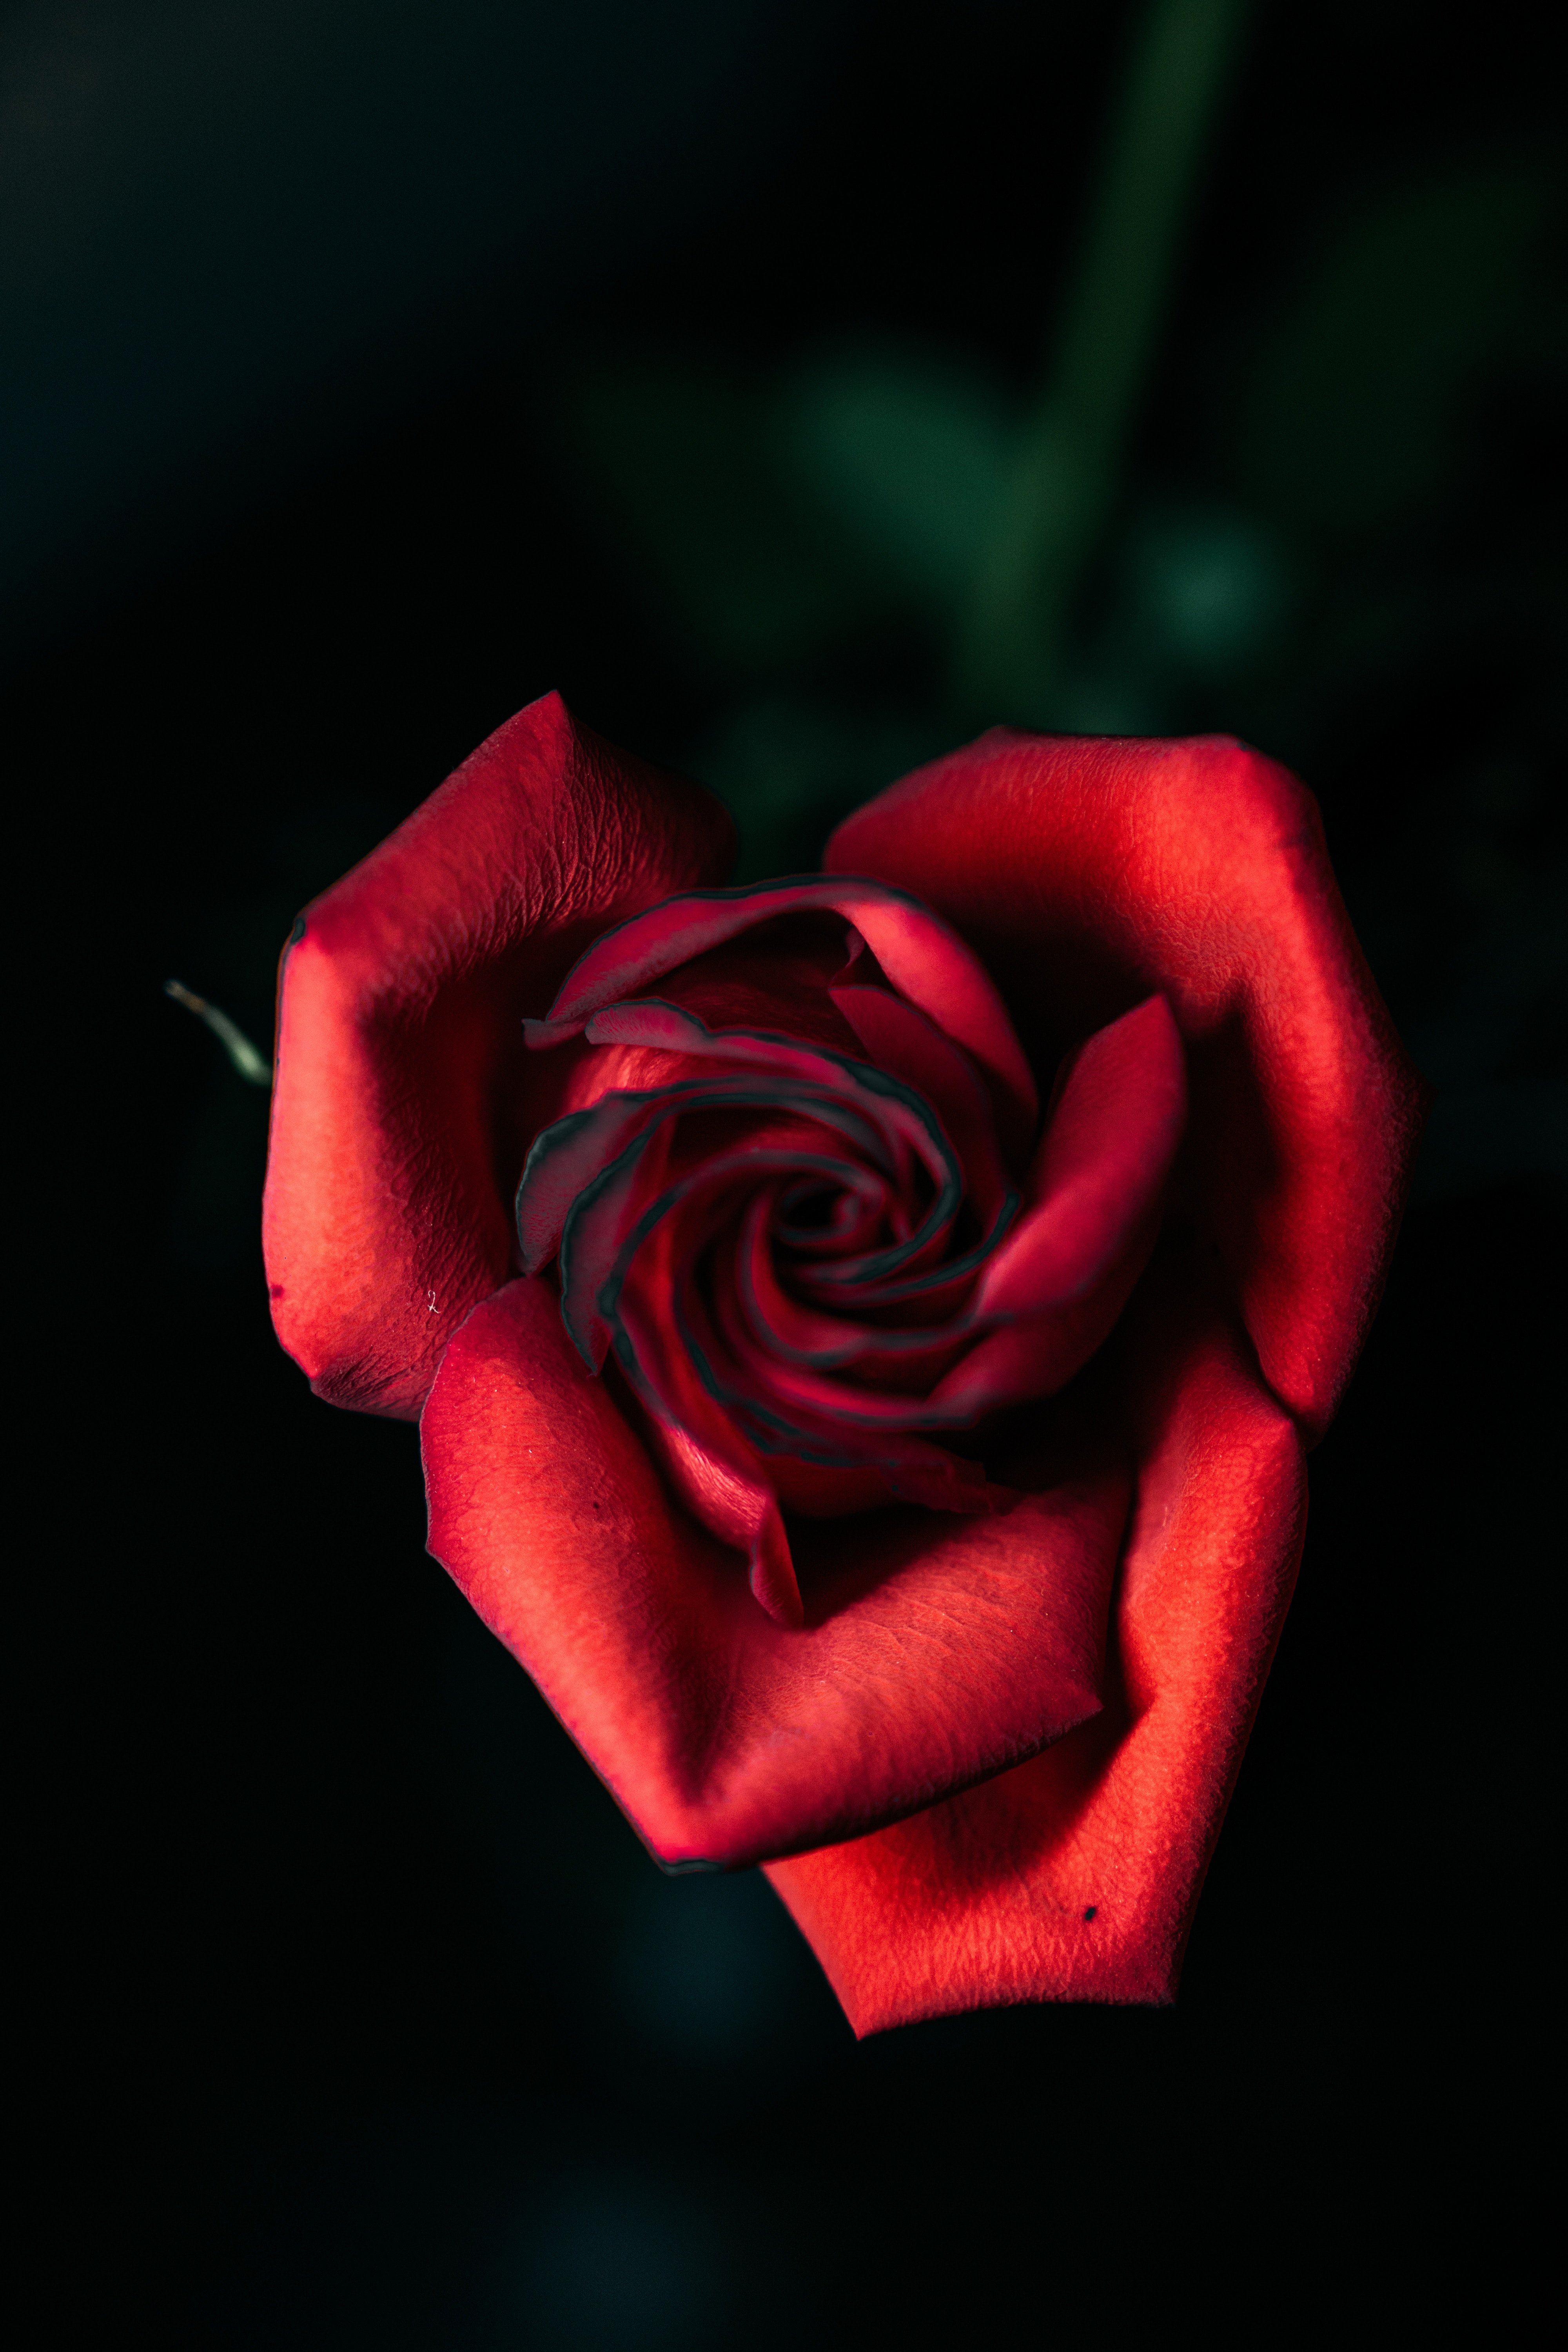 Phone Background Full HD flowers, rose flower, rose, close-up